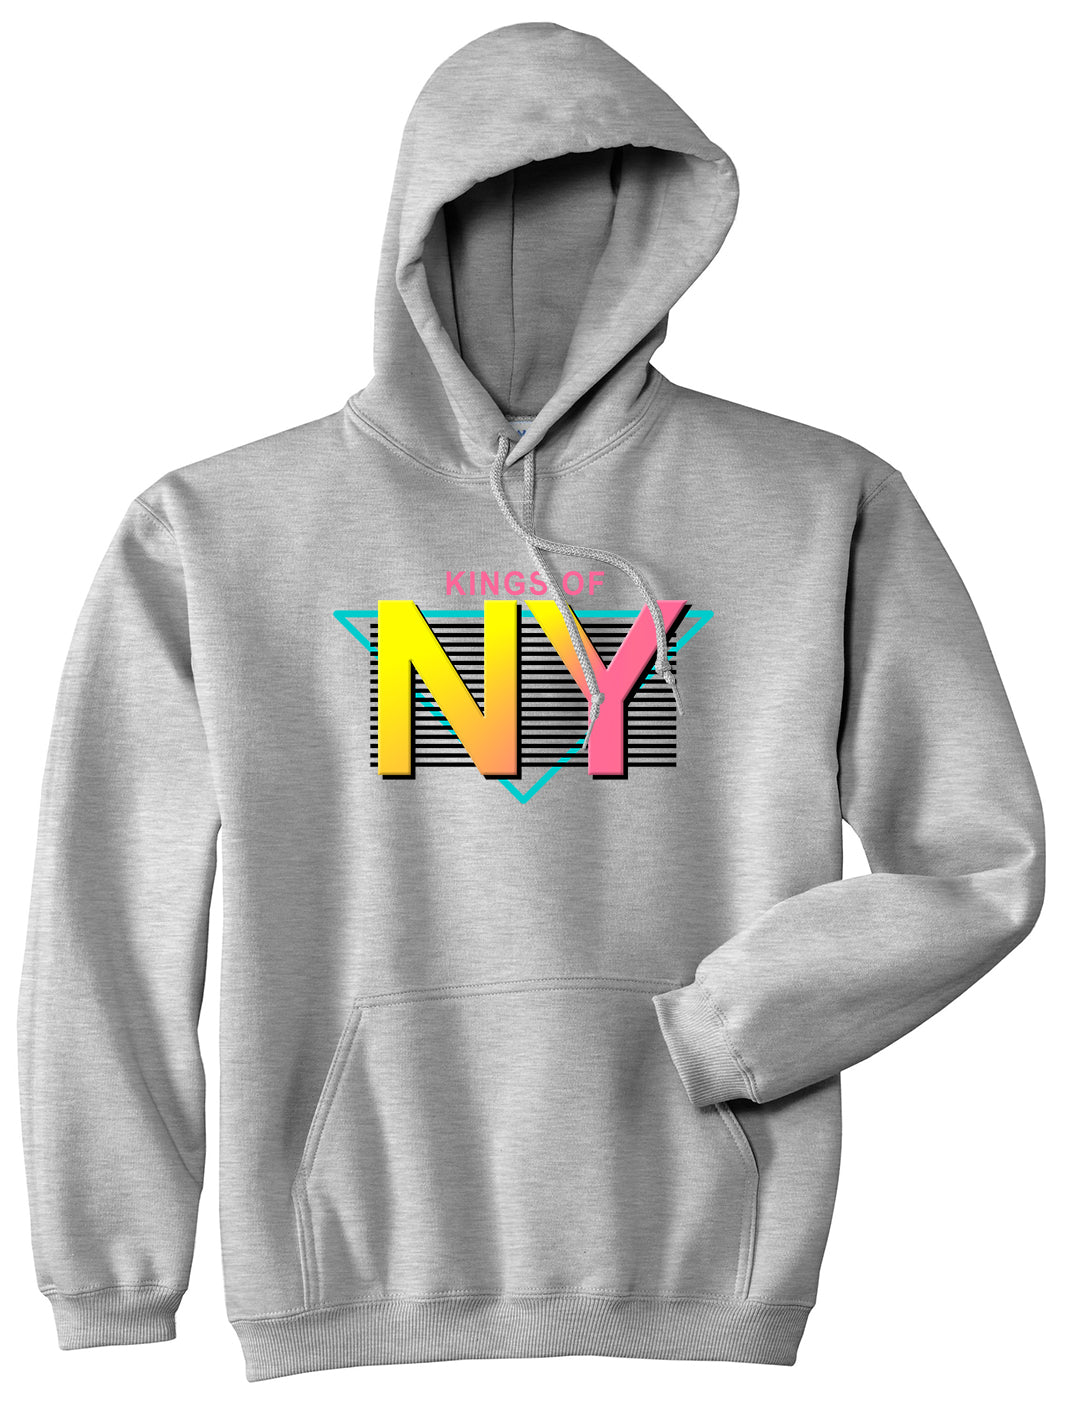 Kings Of NY 80s Retro Mens Pullover Hoodie Grey by Kings Of NY